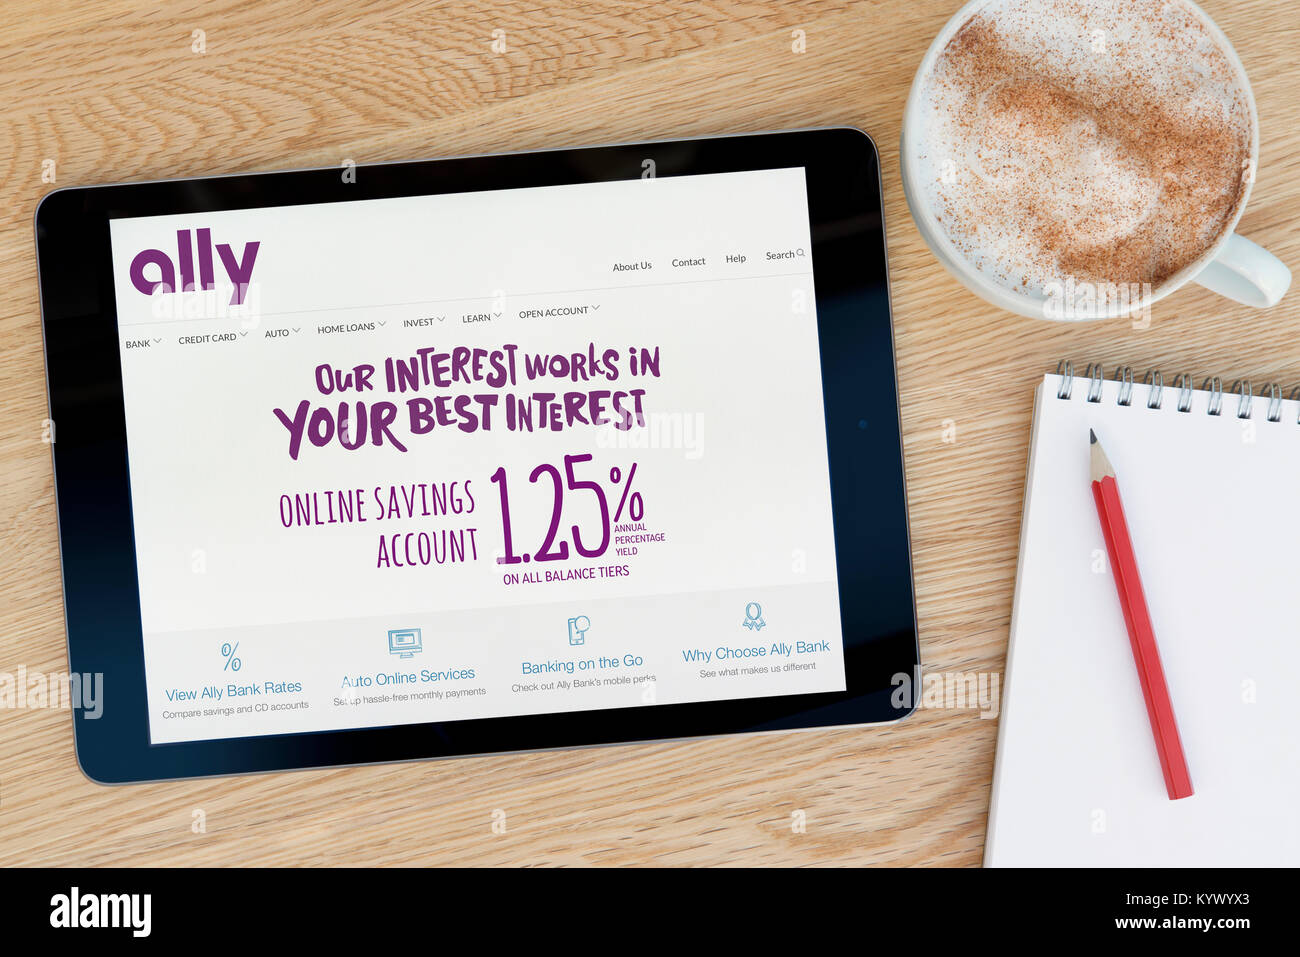 The Ally Bank website on an iPad tablet, on a wooden table beside a notepad, pencil and cup of coffee (Editorial only) Stock Photo